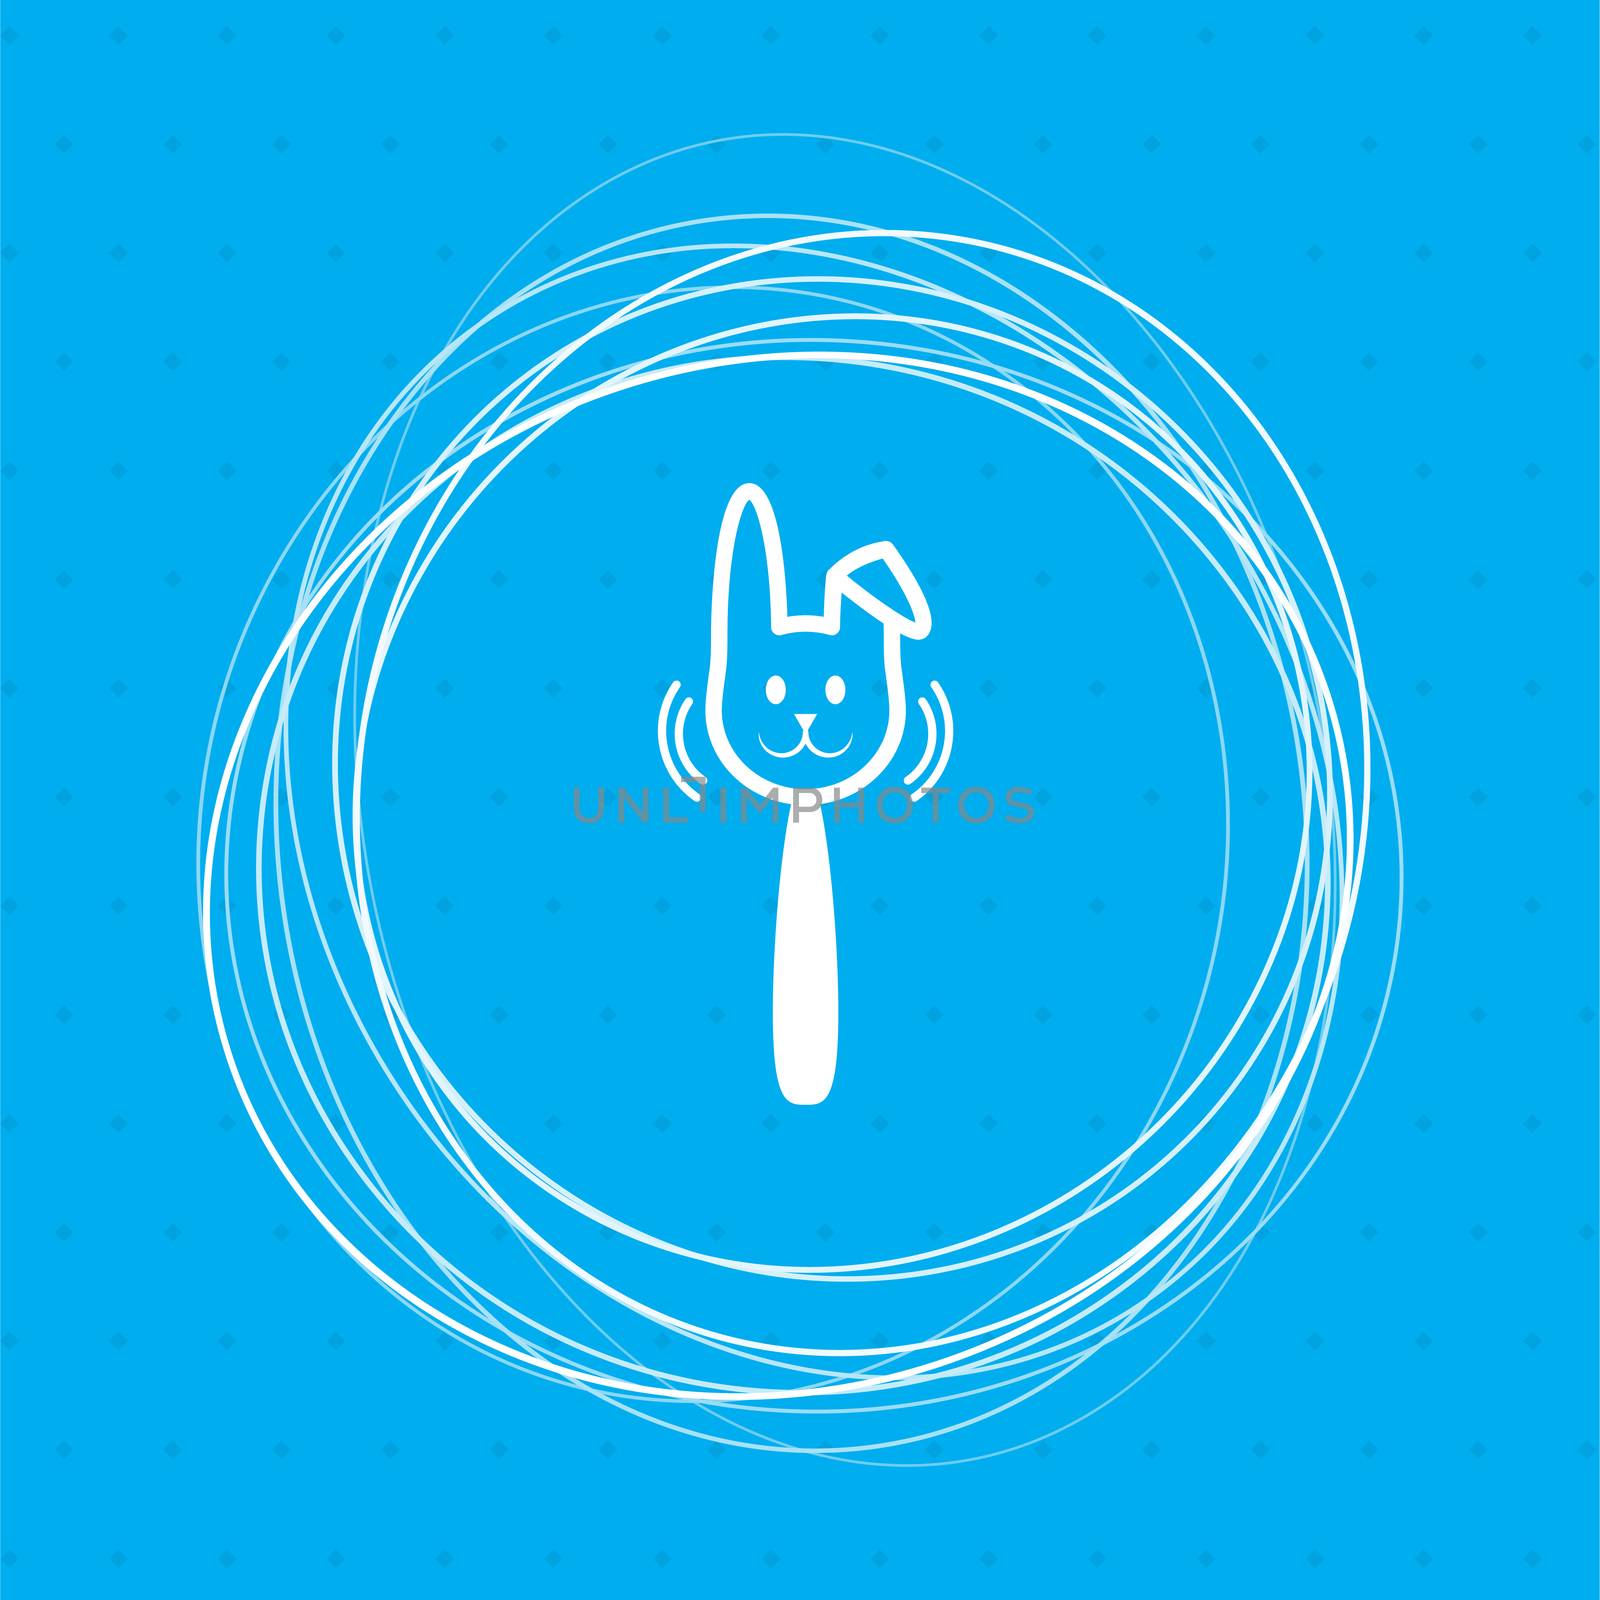 easter rabbit icon on a blue background with abstract circles around and place for your text. illustration